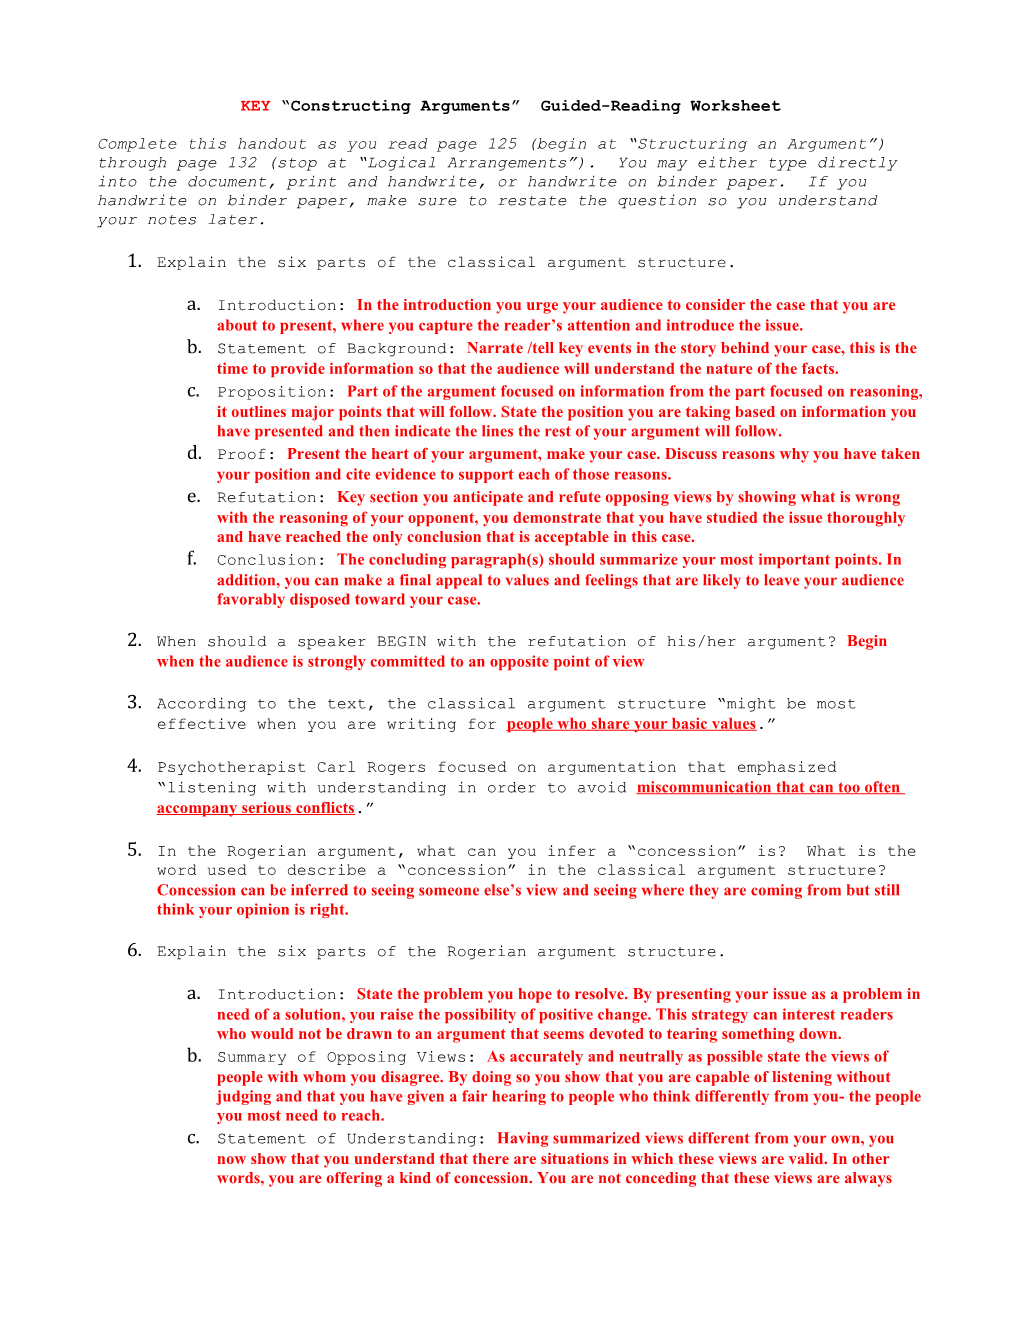 KEY Constructing Arguments Guided-Reading Worksheet